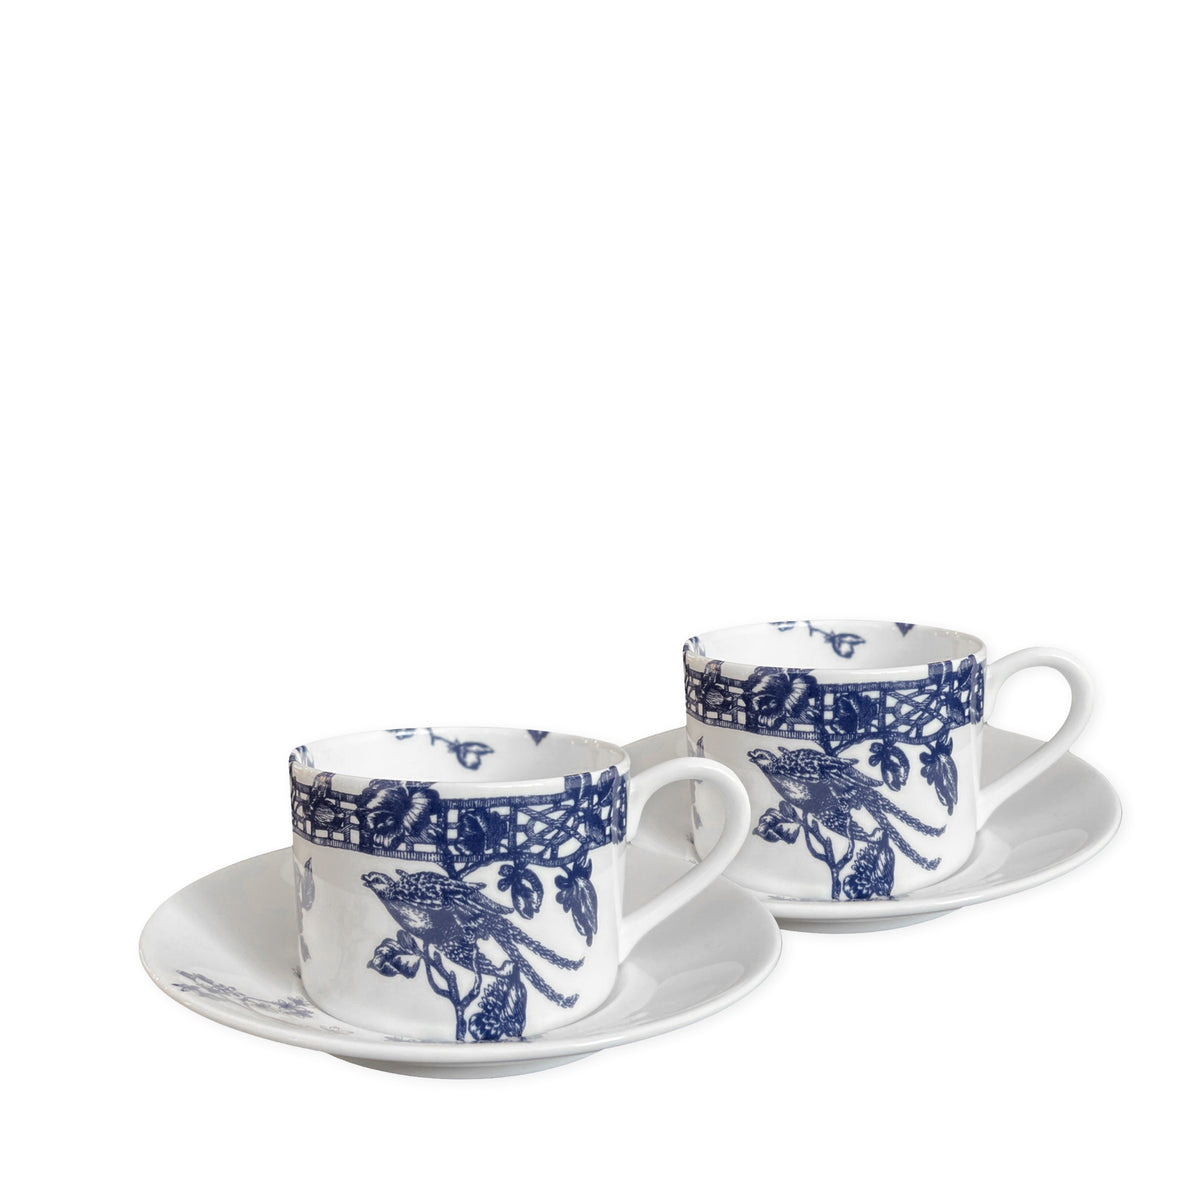 Two white ceramic teacups with blue floral patterns, reminiscent of Chinoiserie Toile, rest on matching saucers. The intricate designs evoke a sense of antique textiles as they sit side by side against a plain background. These are the Chinoiserie Toile Cups &amp; Saucers, Set of 2 by Caskata Artisanal Home.